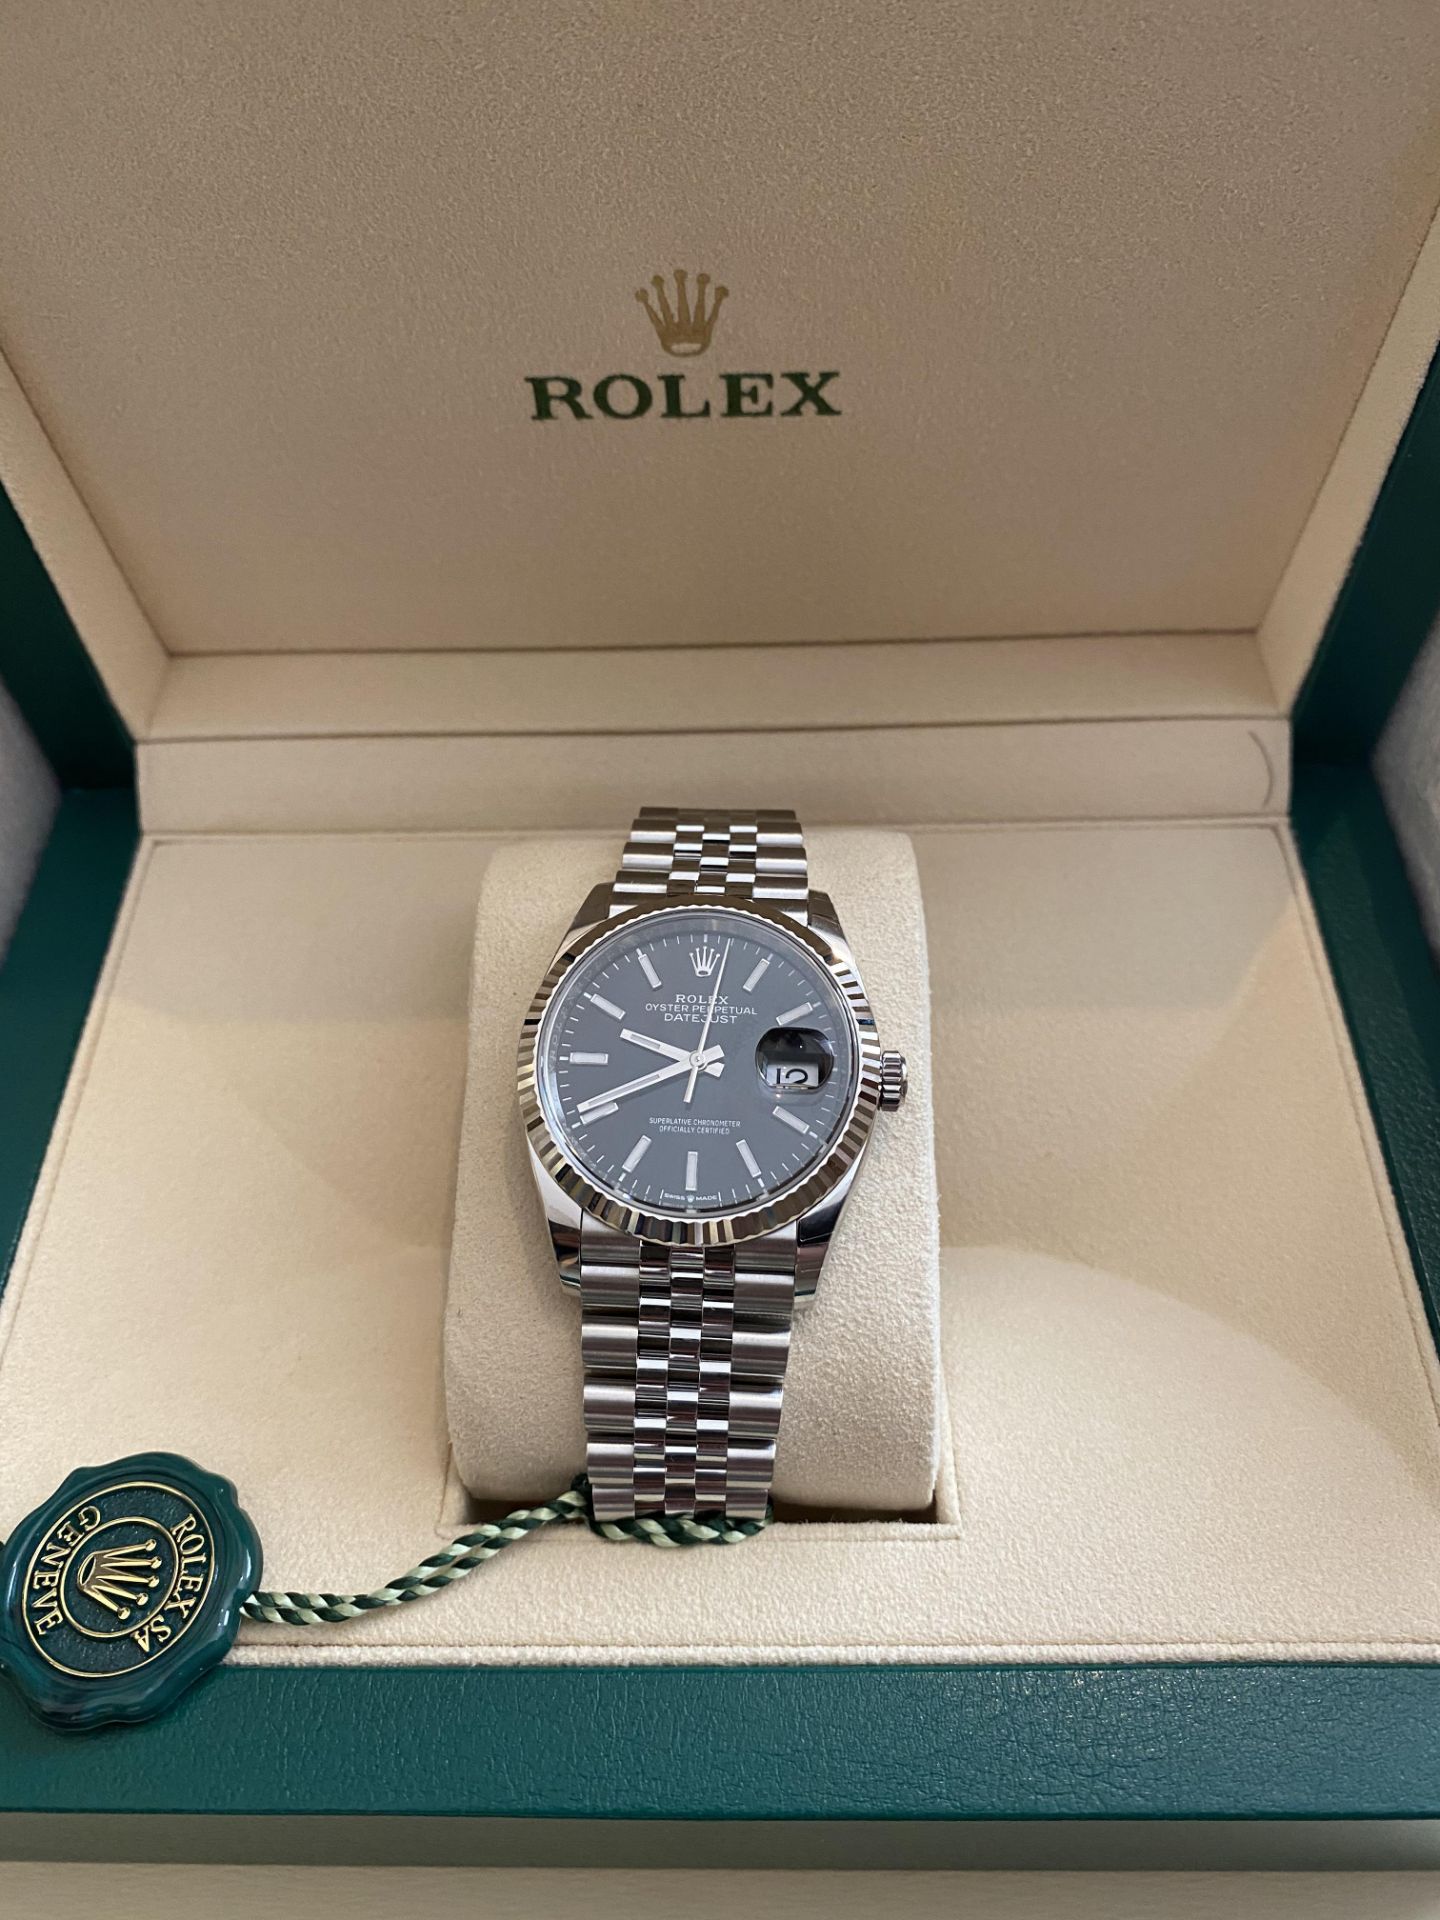 2020 ROLEX DATEJUST 36 OYSTERSTEEL 36MM AND WHITE GOLD - Image 6 of 10